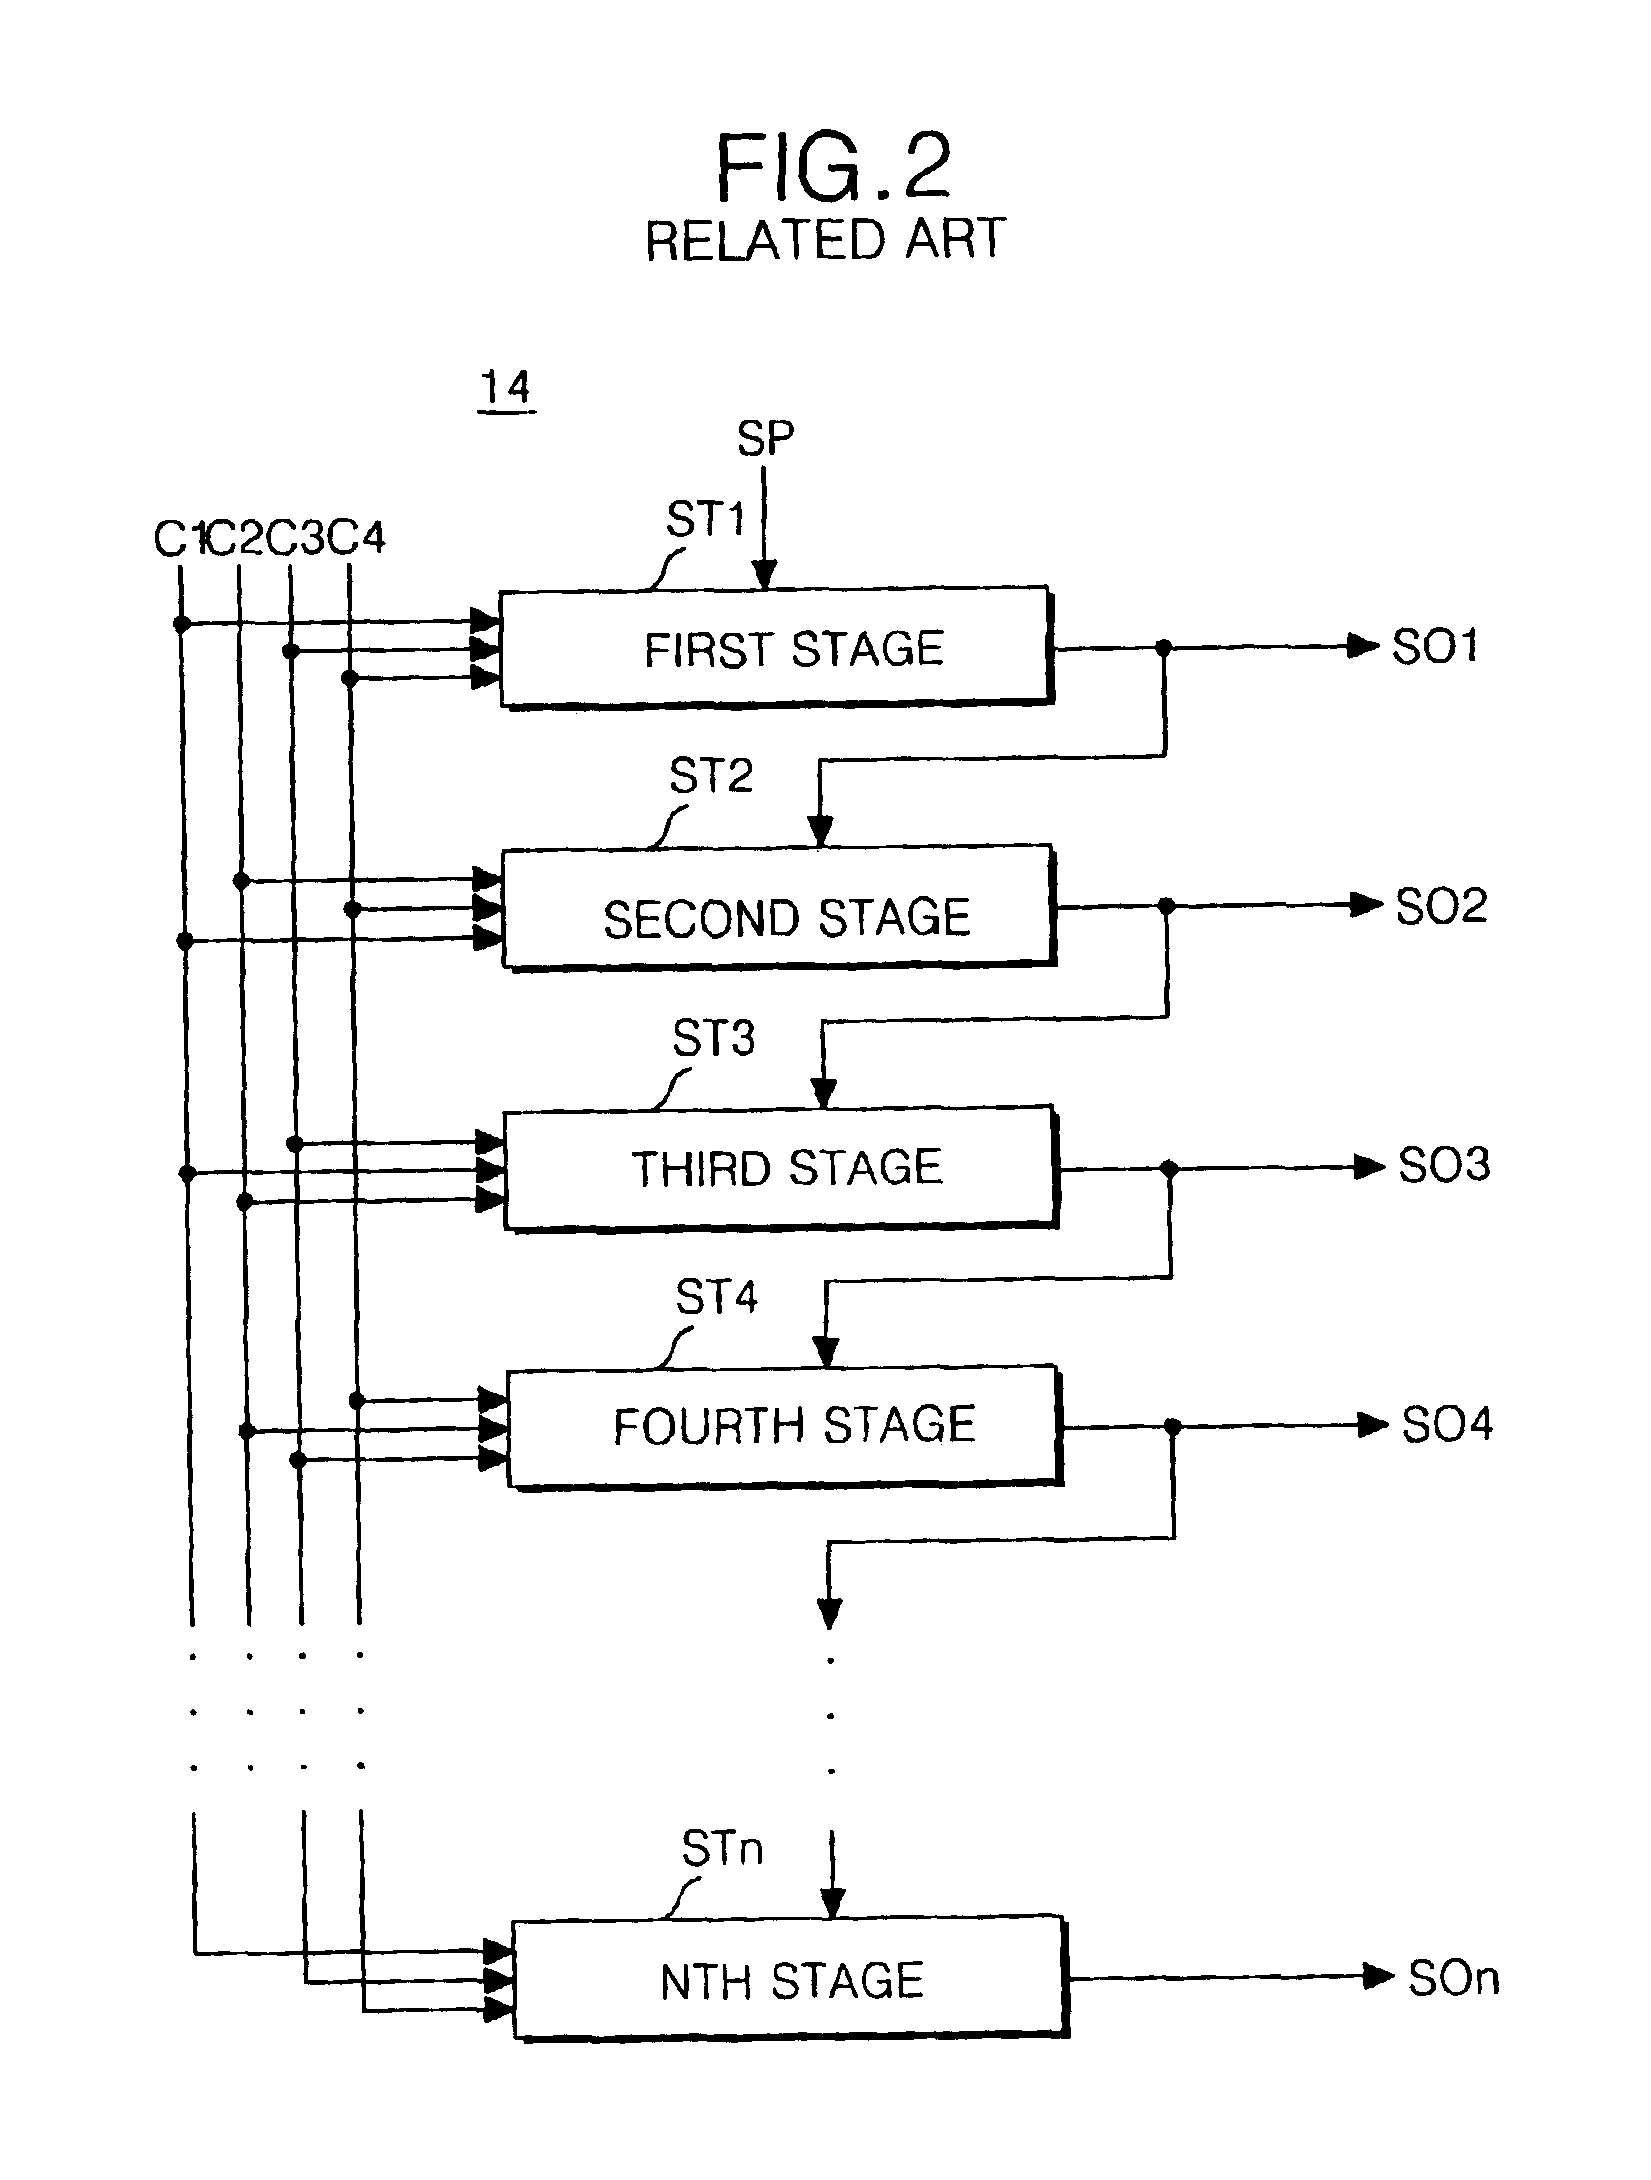 Shift register with built-in level shifter